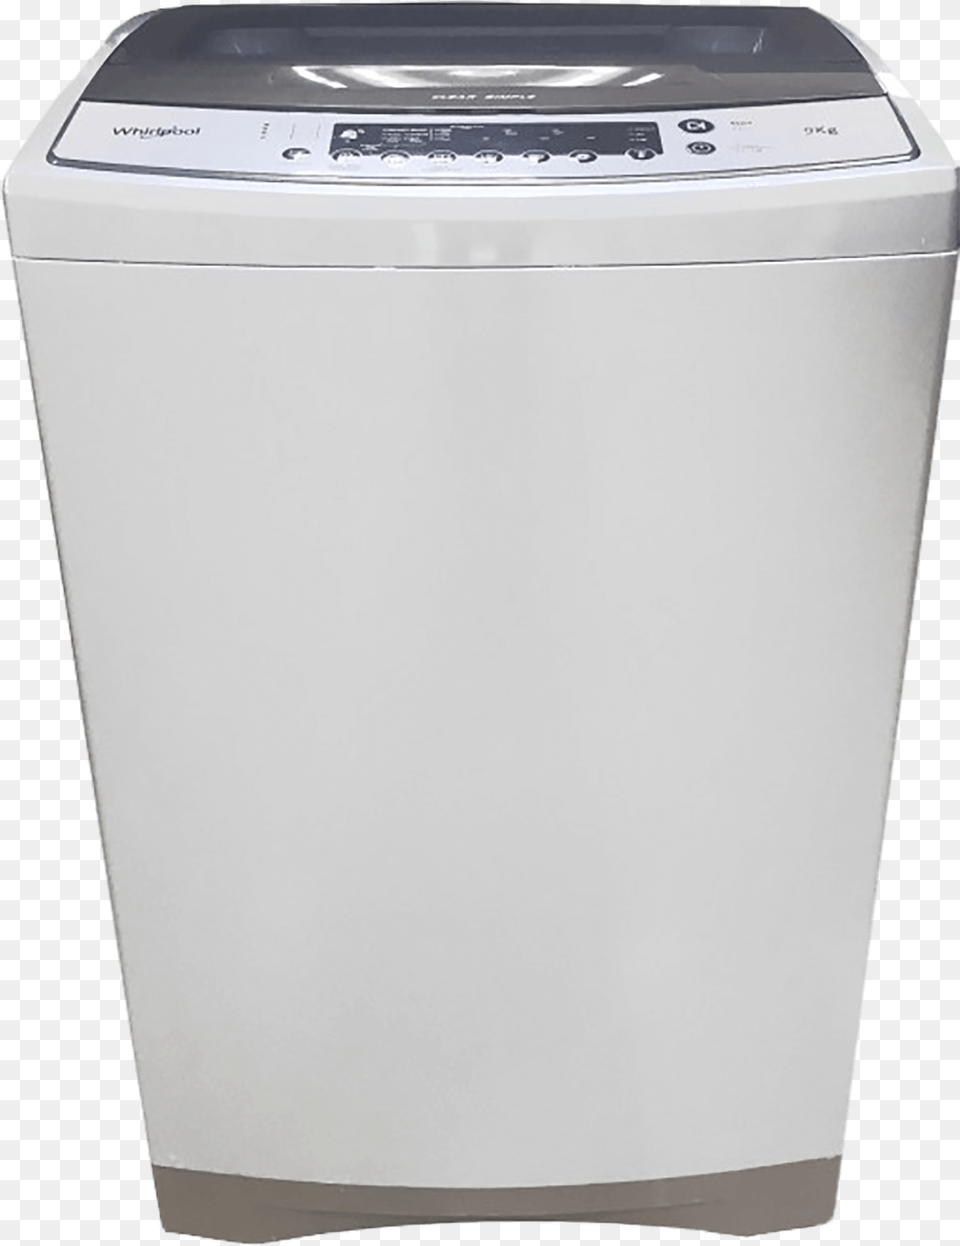 Whirlpool Washing Machine Top Load Glass, Appliance, Device, Electrical Device, Washer Free Transparent Png